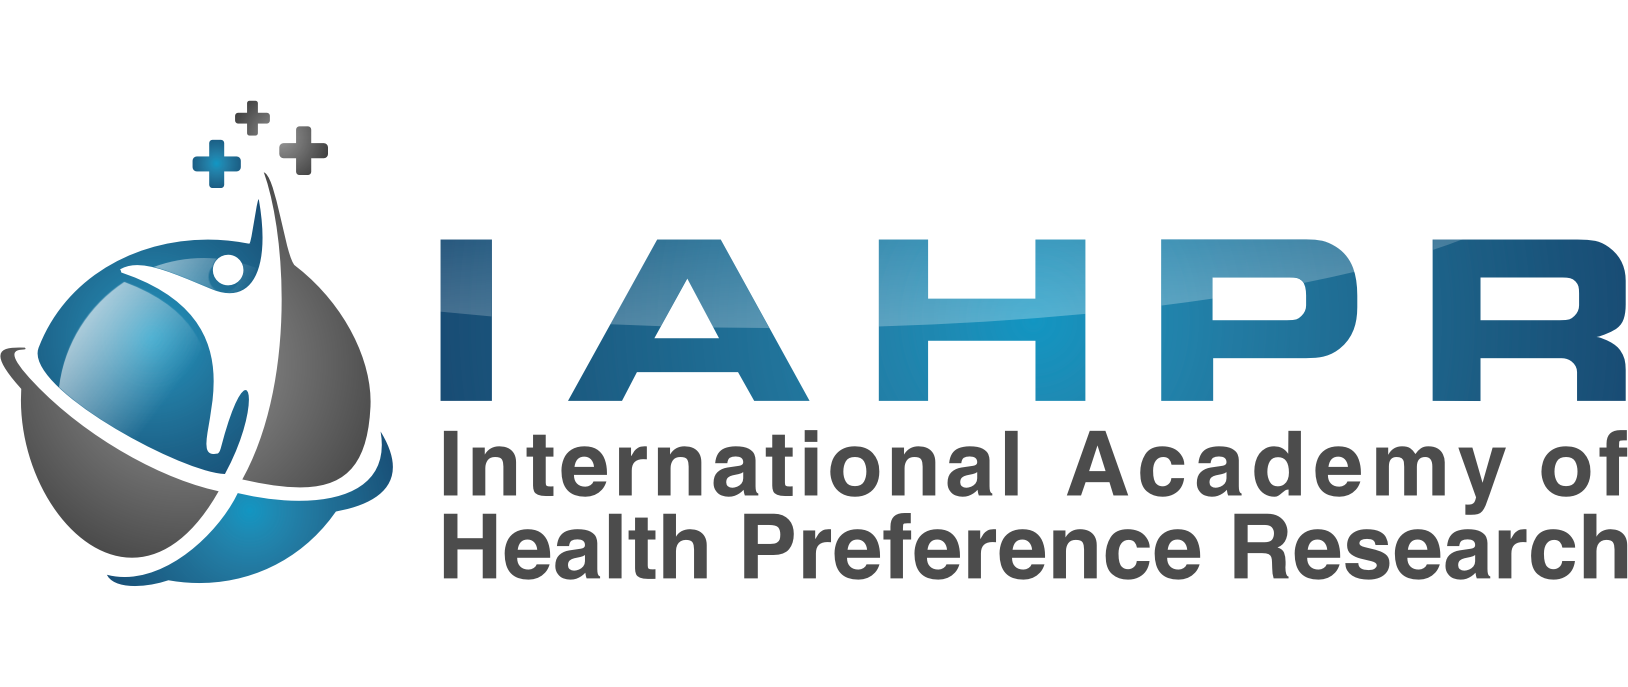 International Academy of Health Preference Research